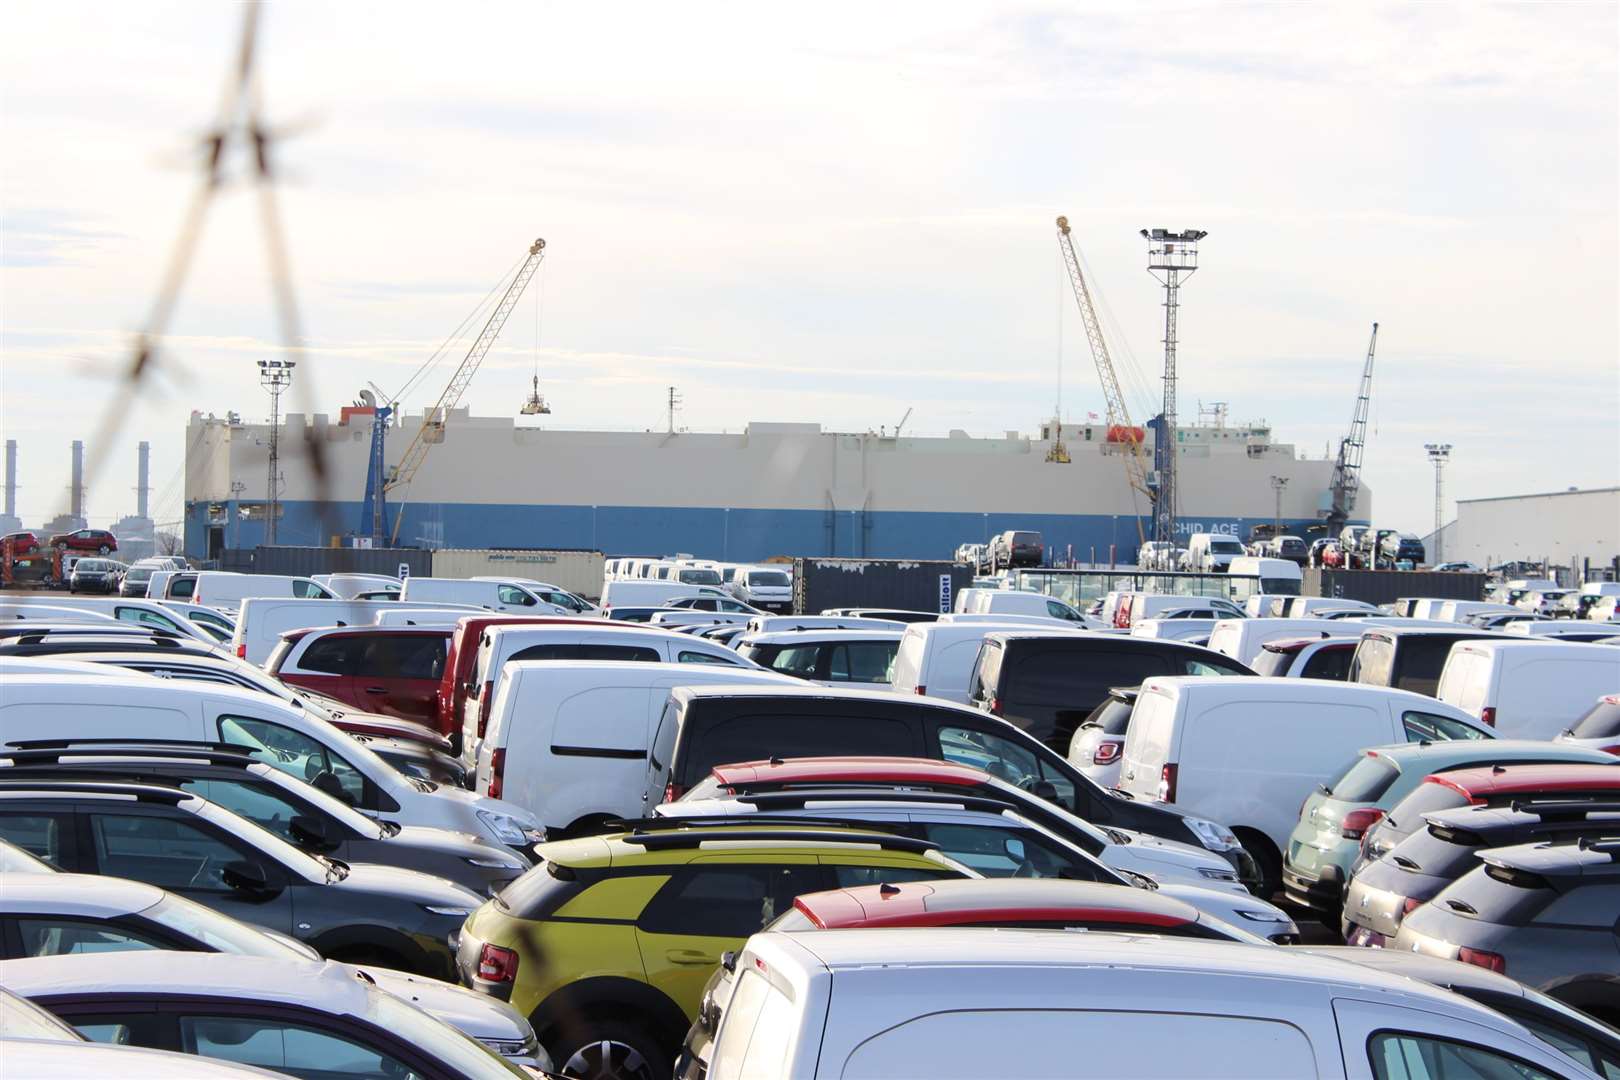 Imported cars unloaded at Peel Ports' Sheerness docks (17797046)